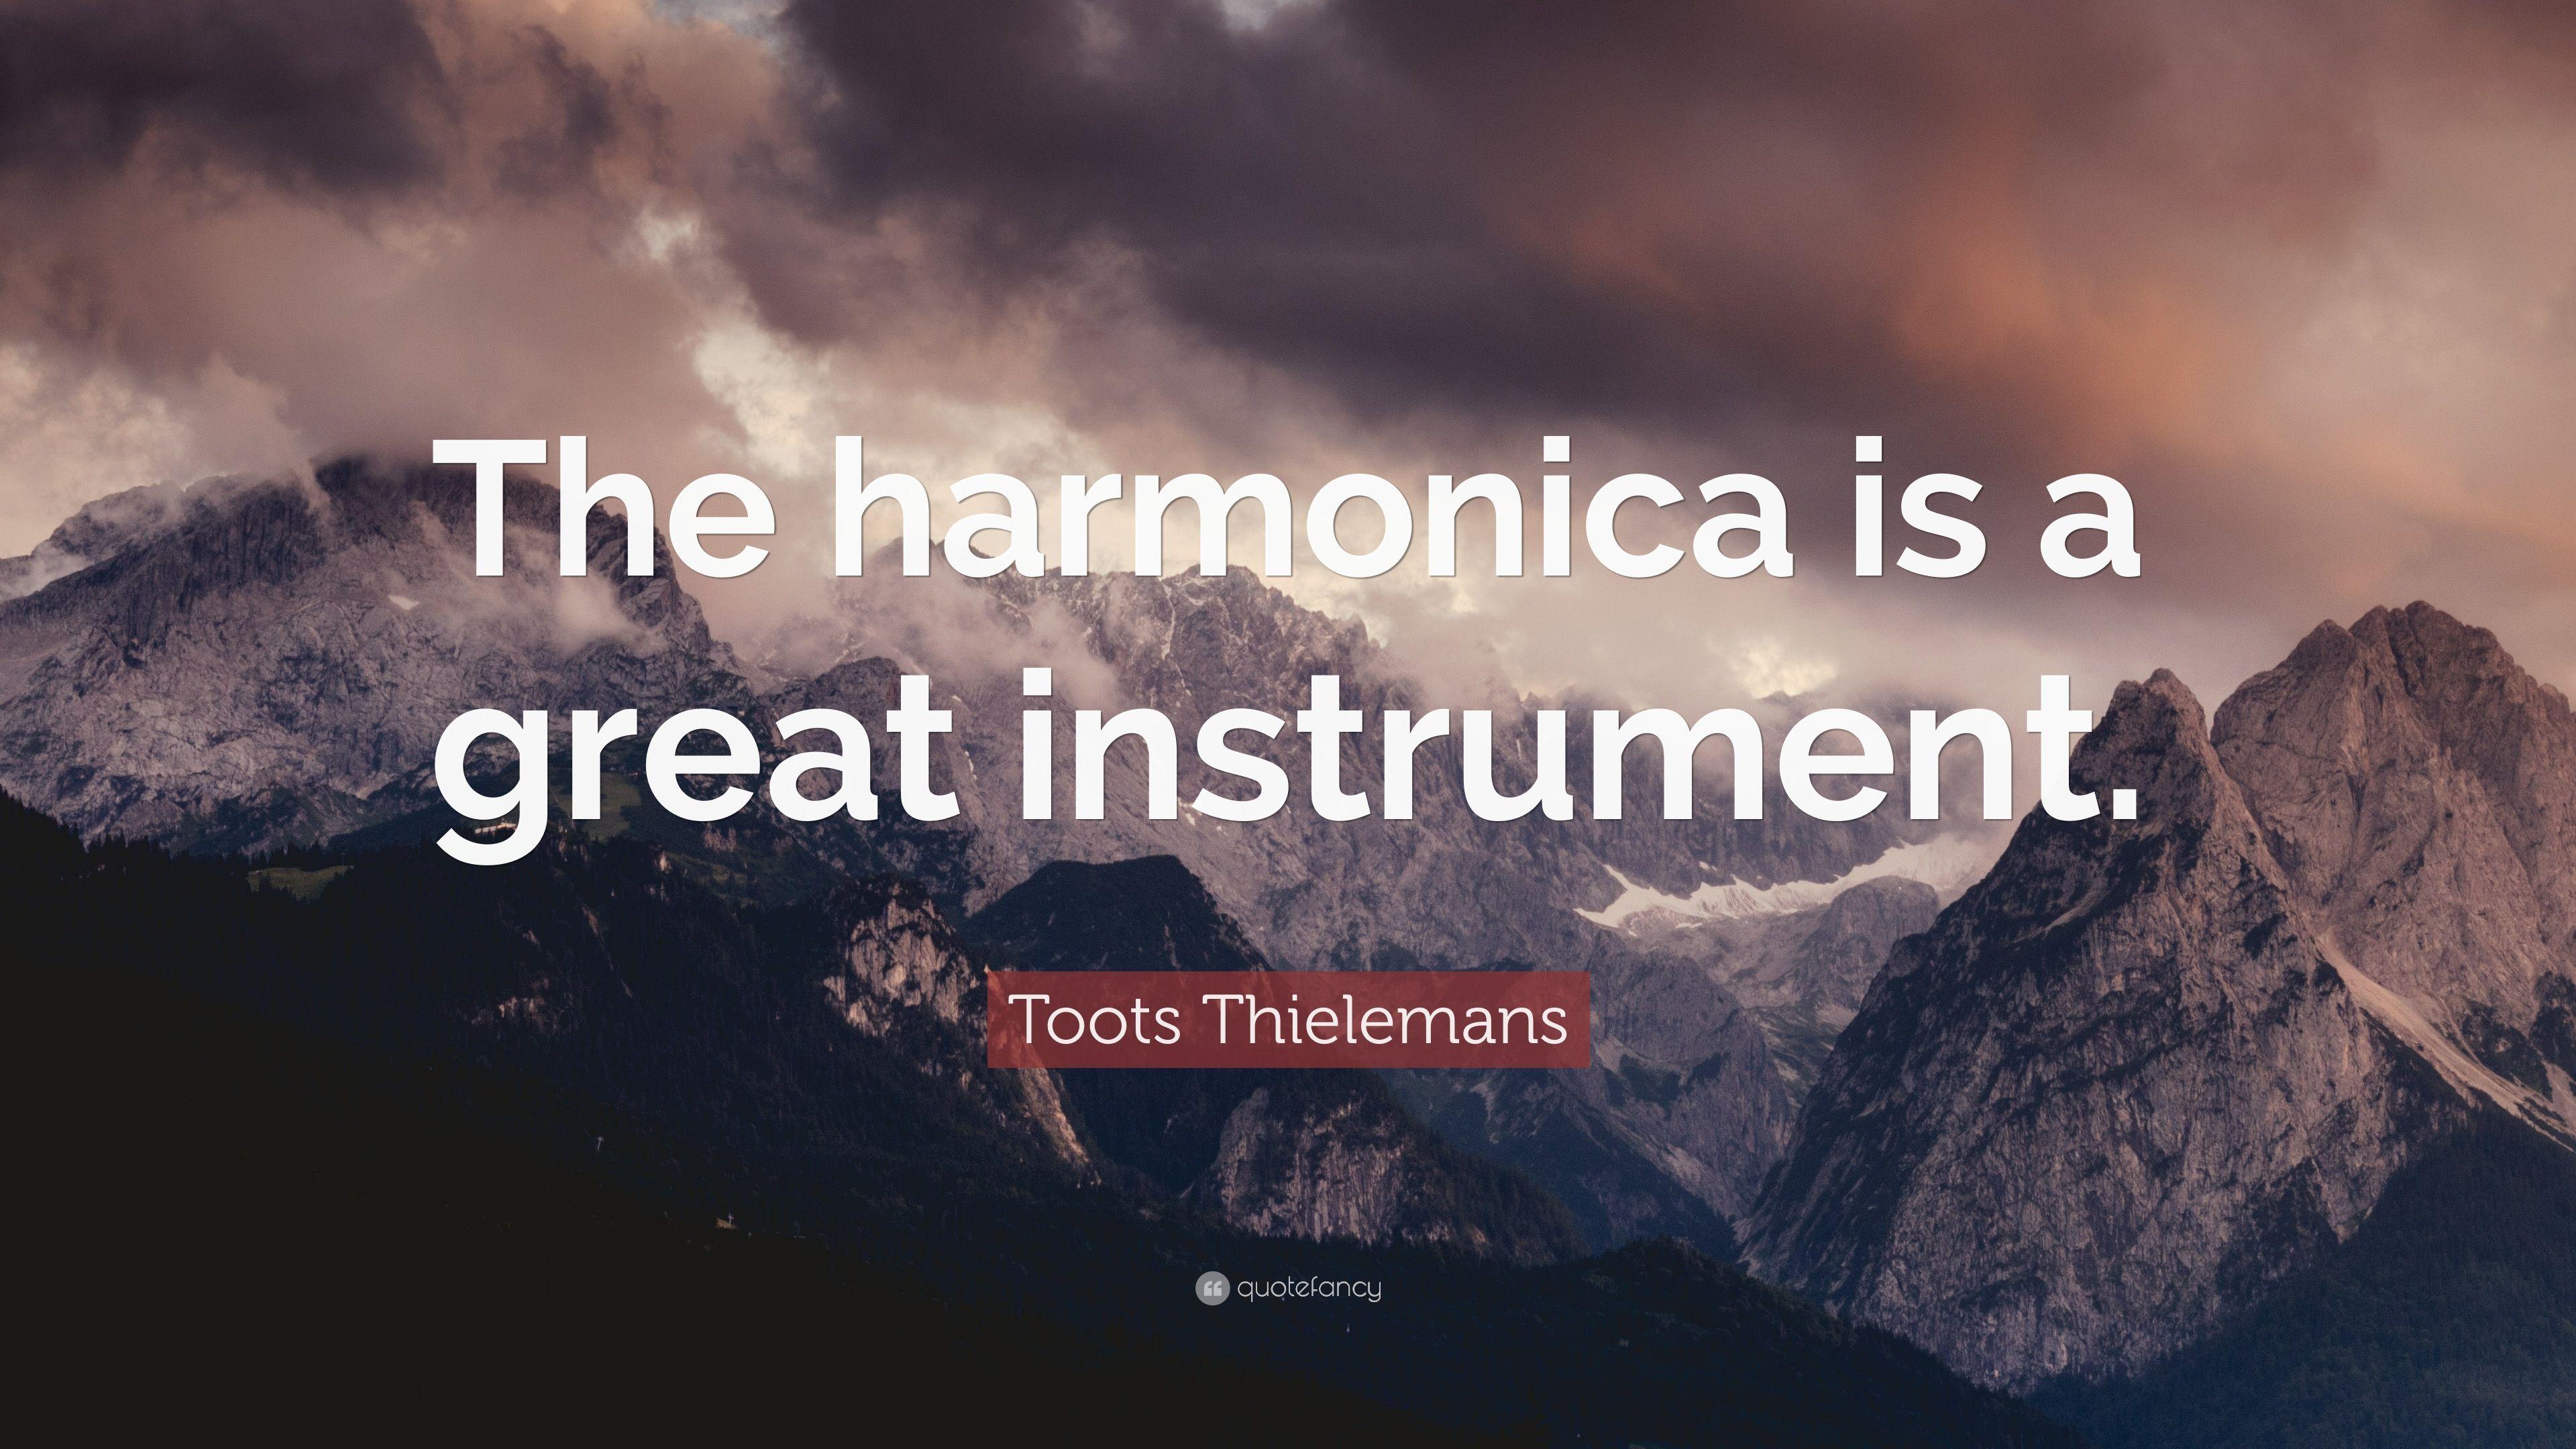 Toots Thielemans Quote: “The harmonica is a great instrument.” 7